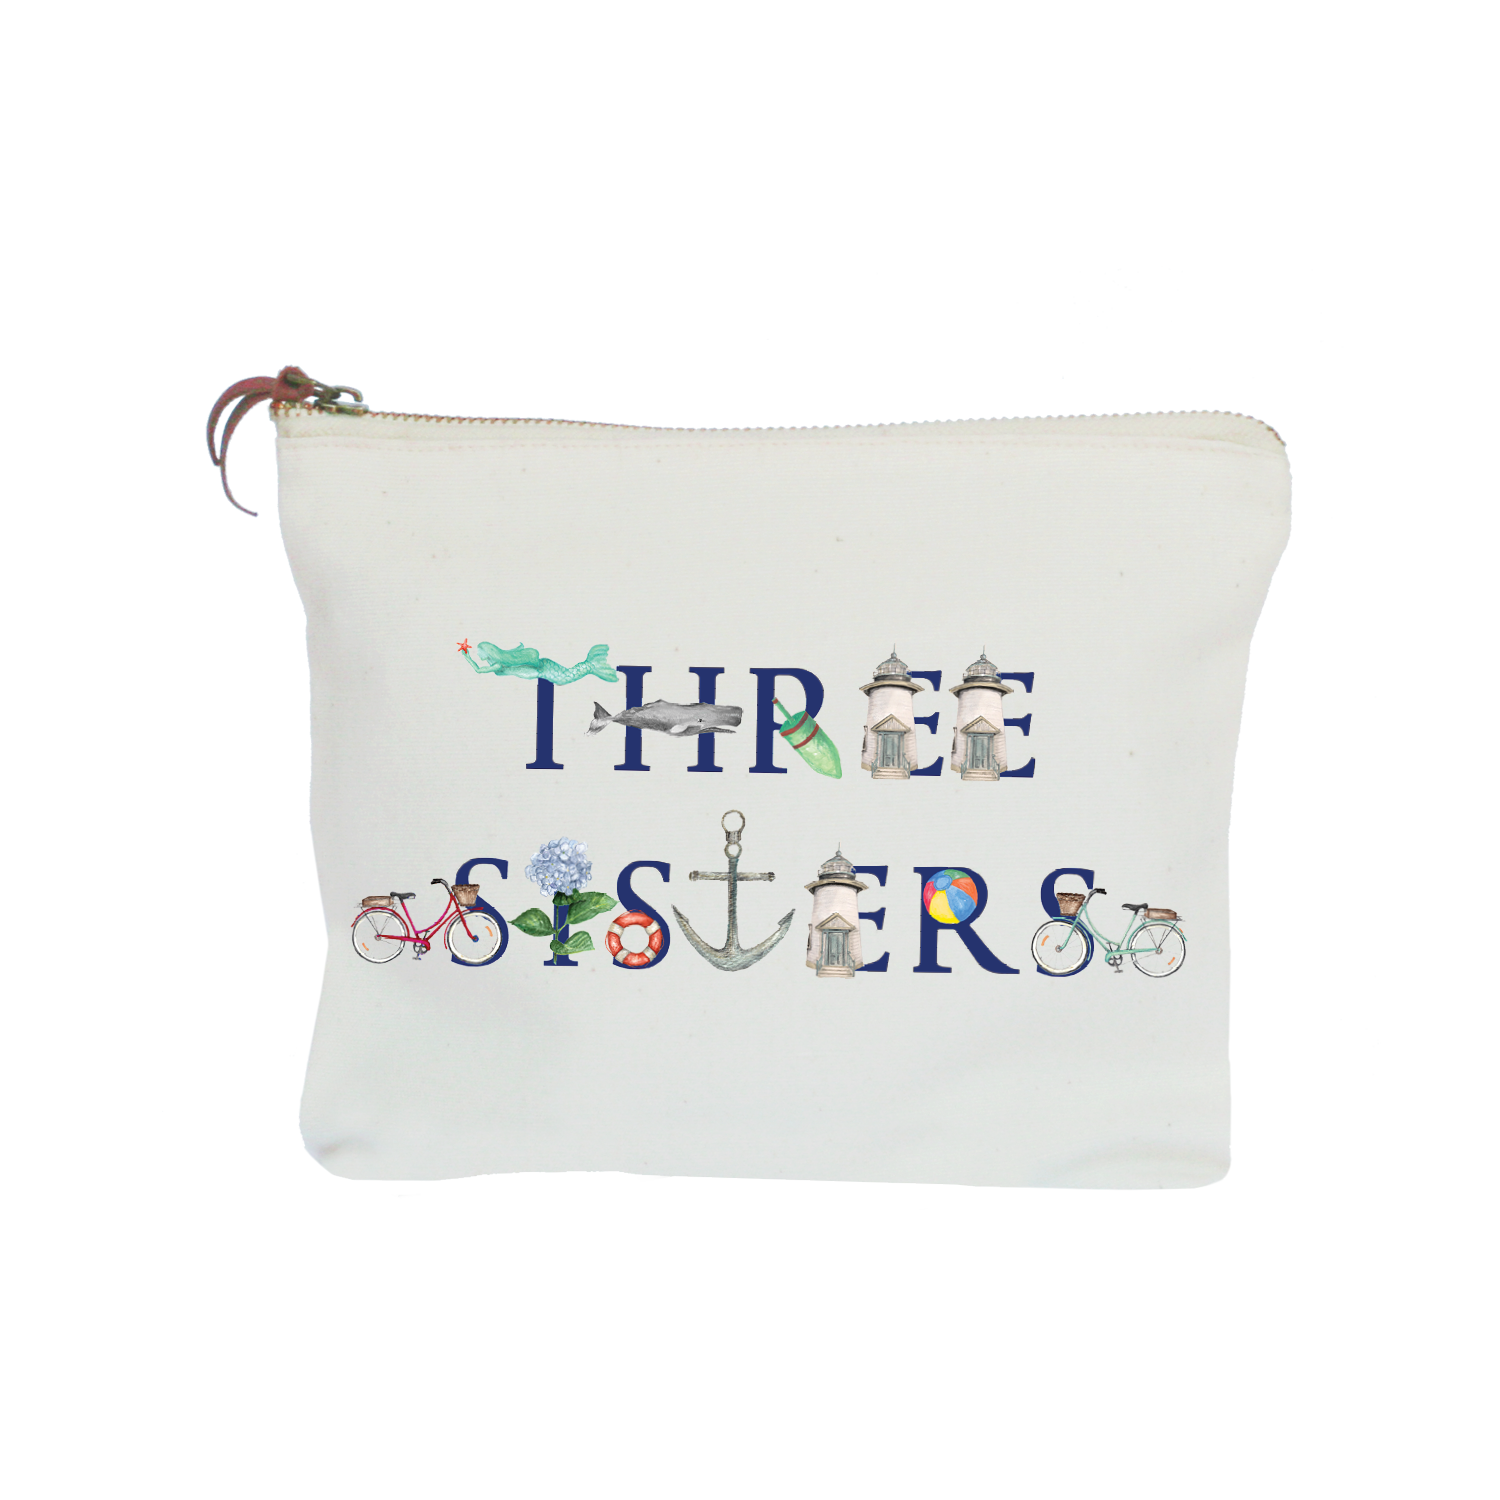 three sisters zipper pouch